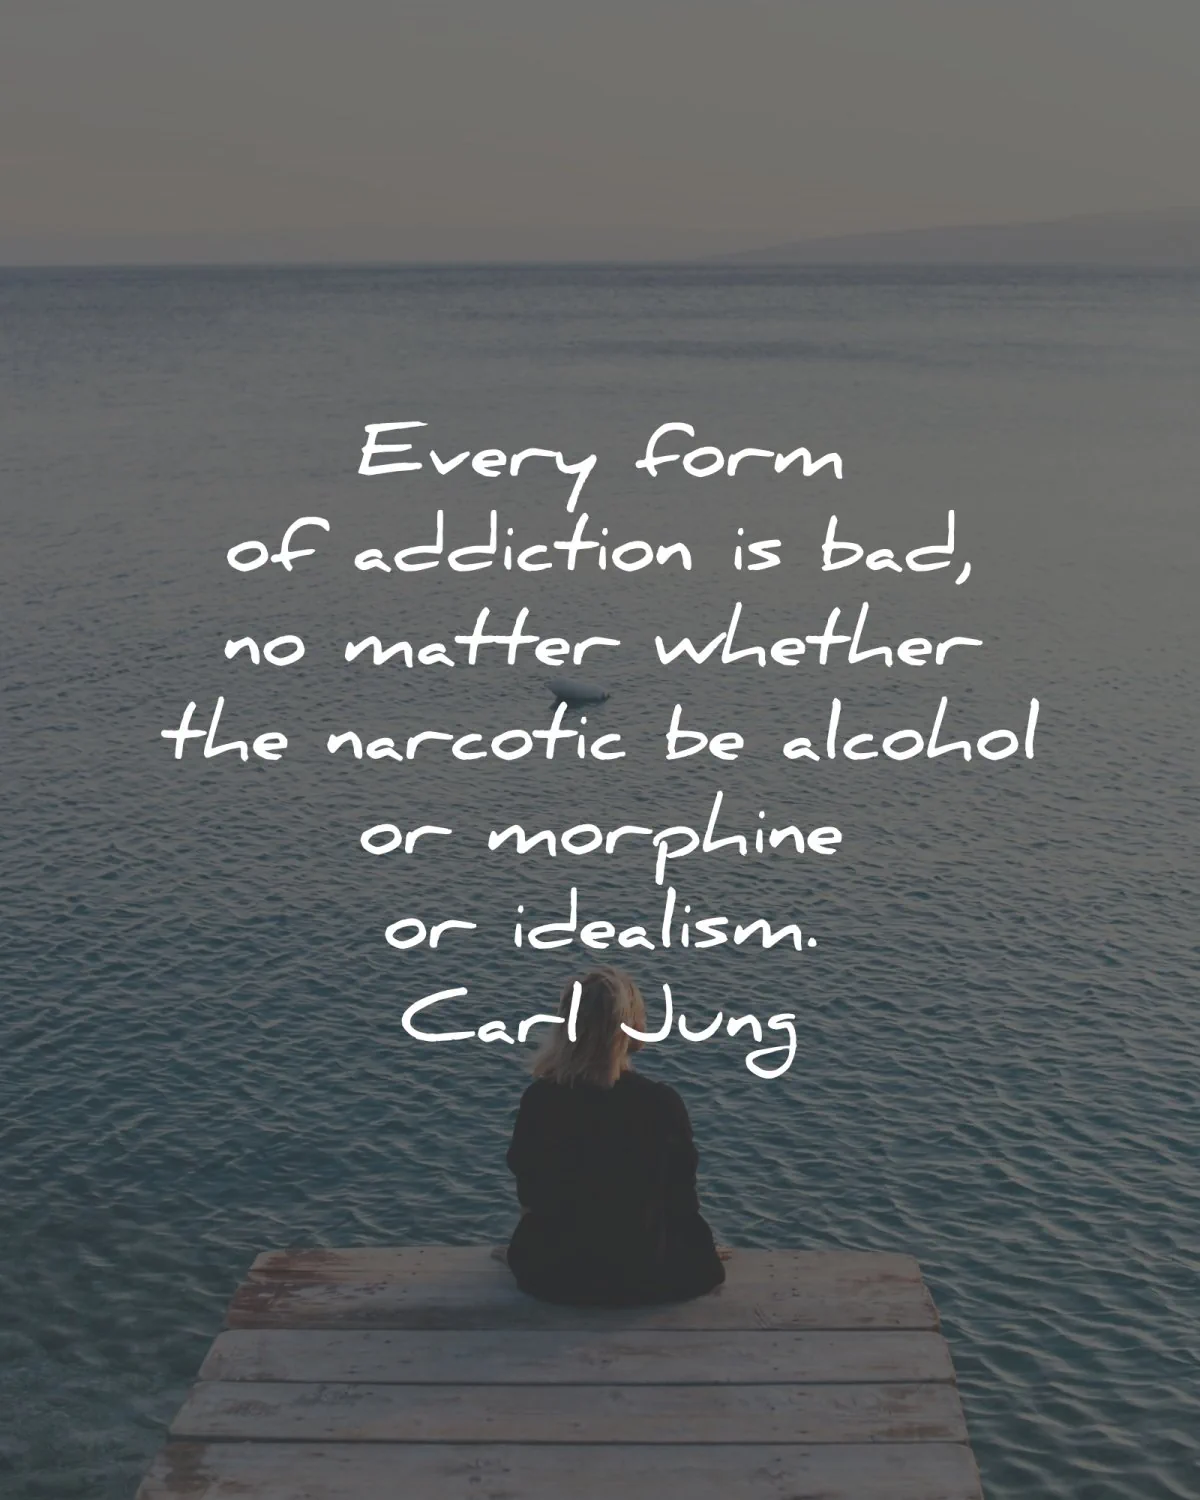 addiction social media quotes every form bad narcotic alcohol carl jung wisdom